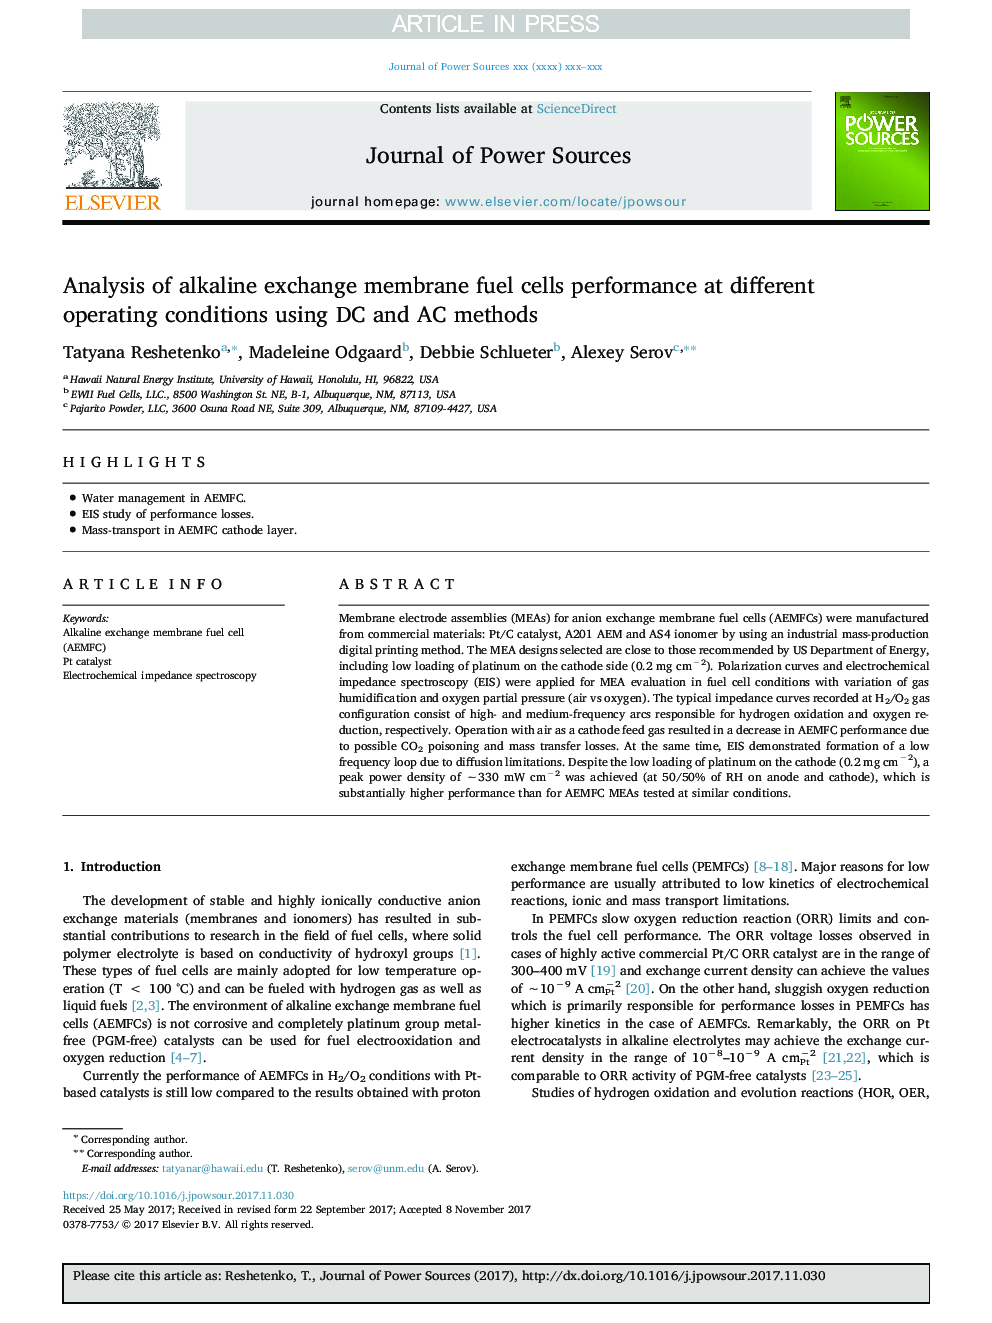 Analysis of alkaline exchange membrane fuel cells performance at different operating conditions using DC and AC methods